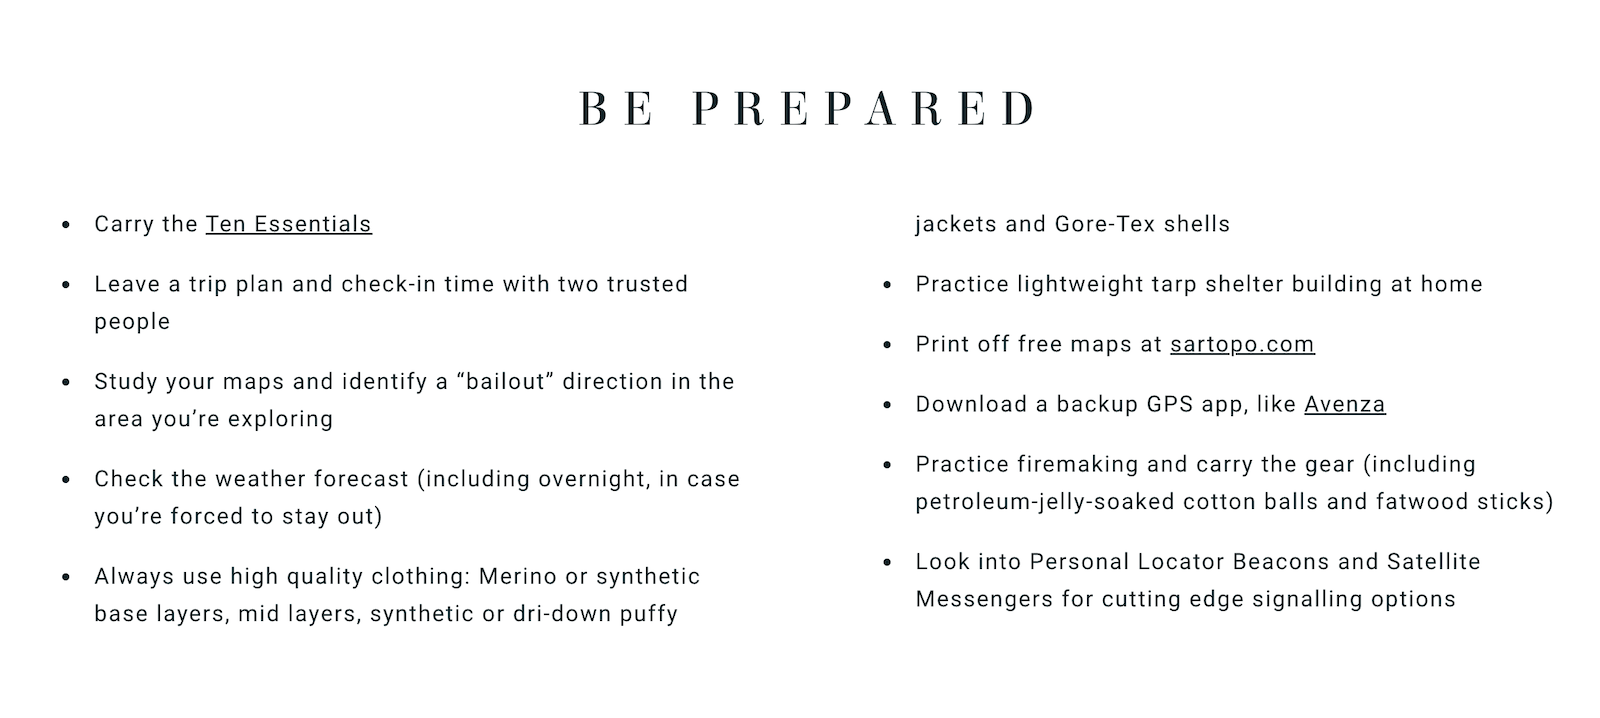 how to survive in the woods - be prepared checklist